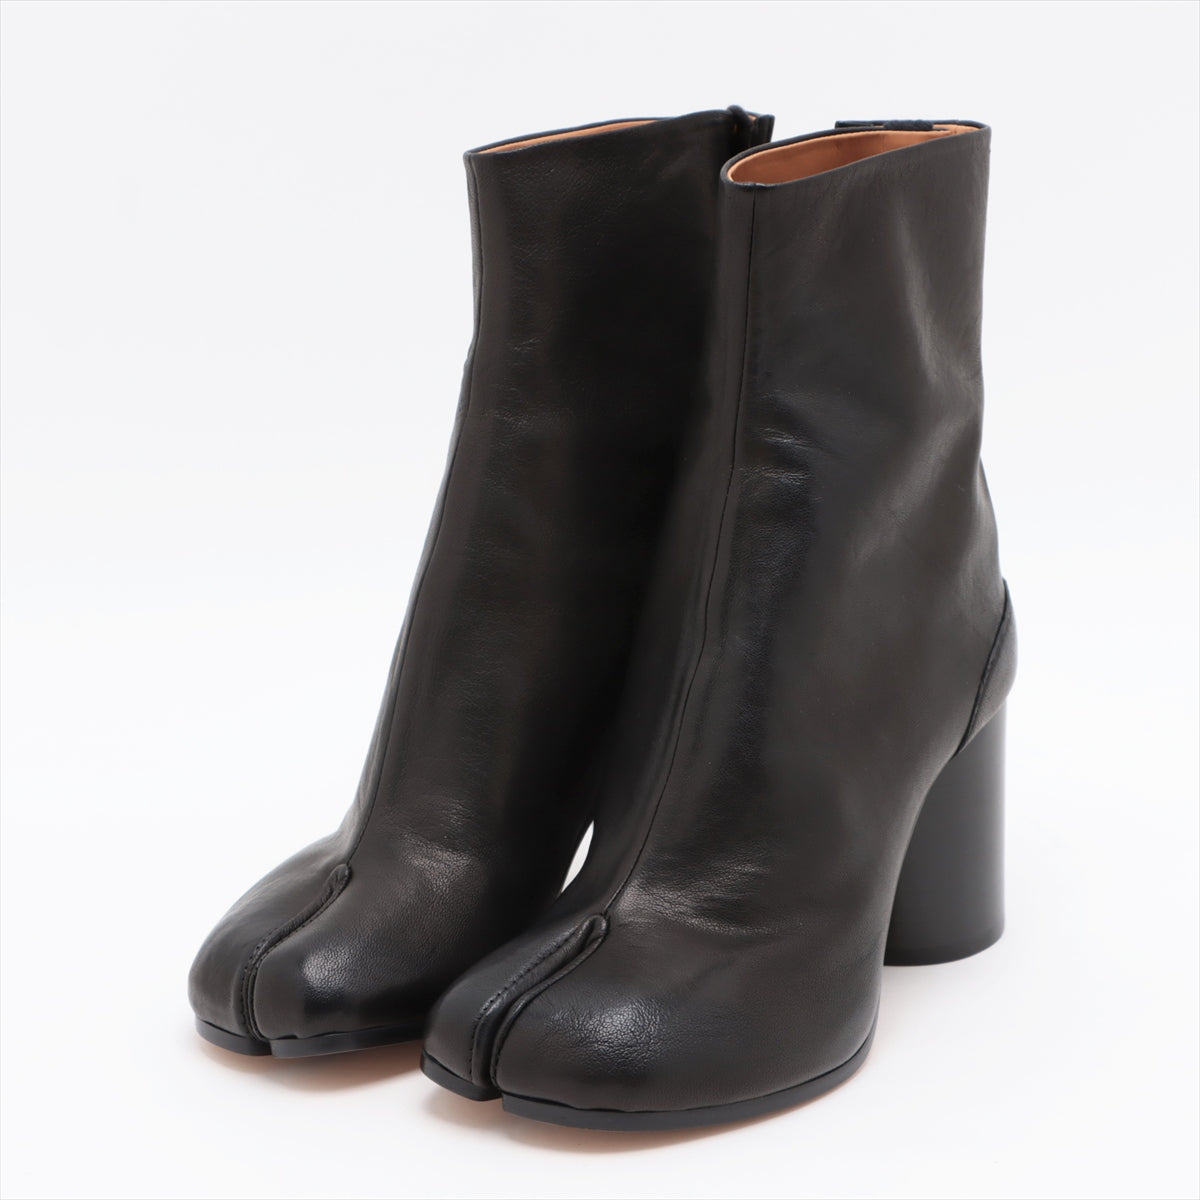 Maison Margiela TABI Leather Short Boots 35 Ladies' Black 22 box There is a bag